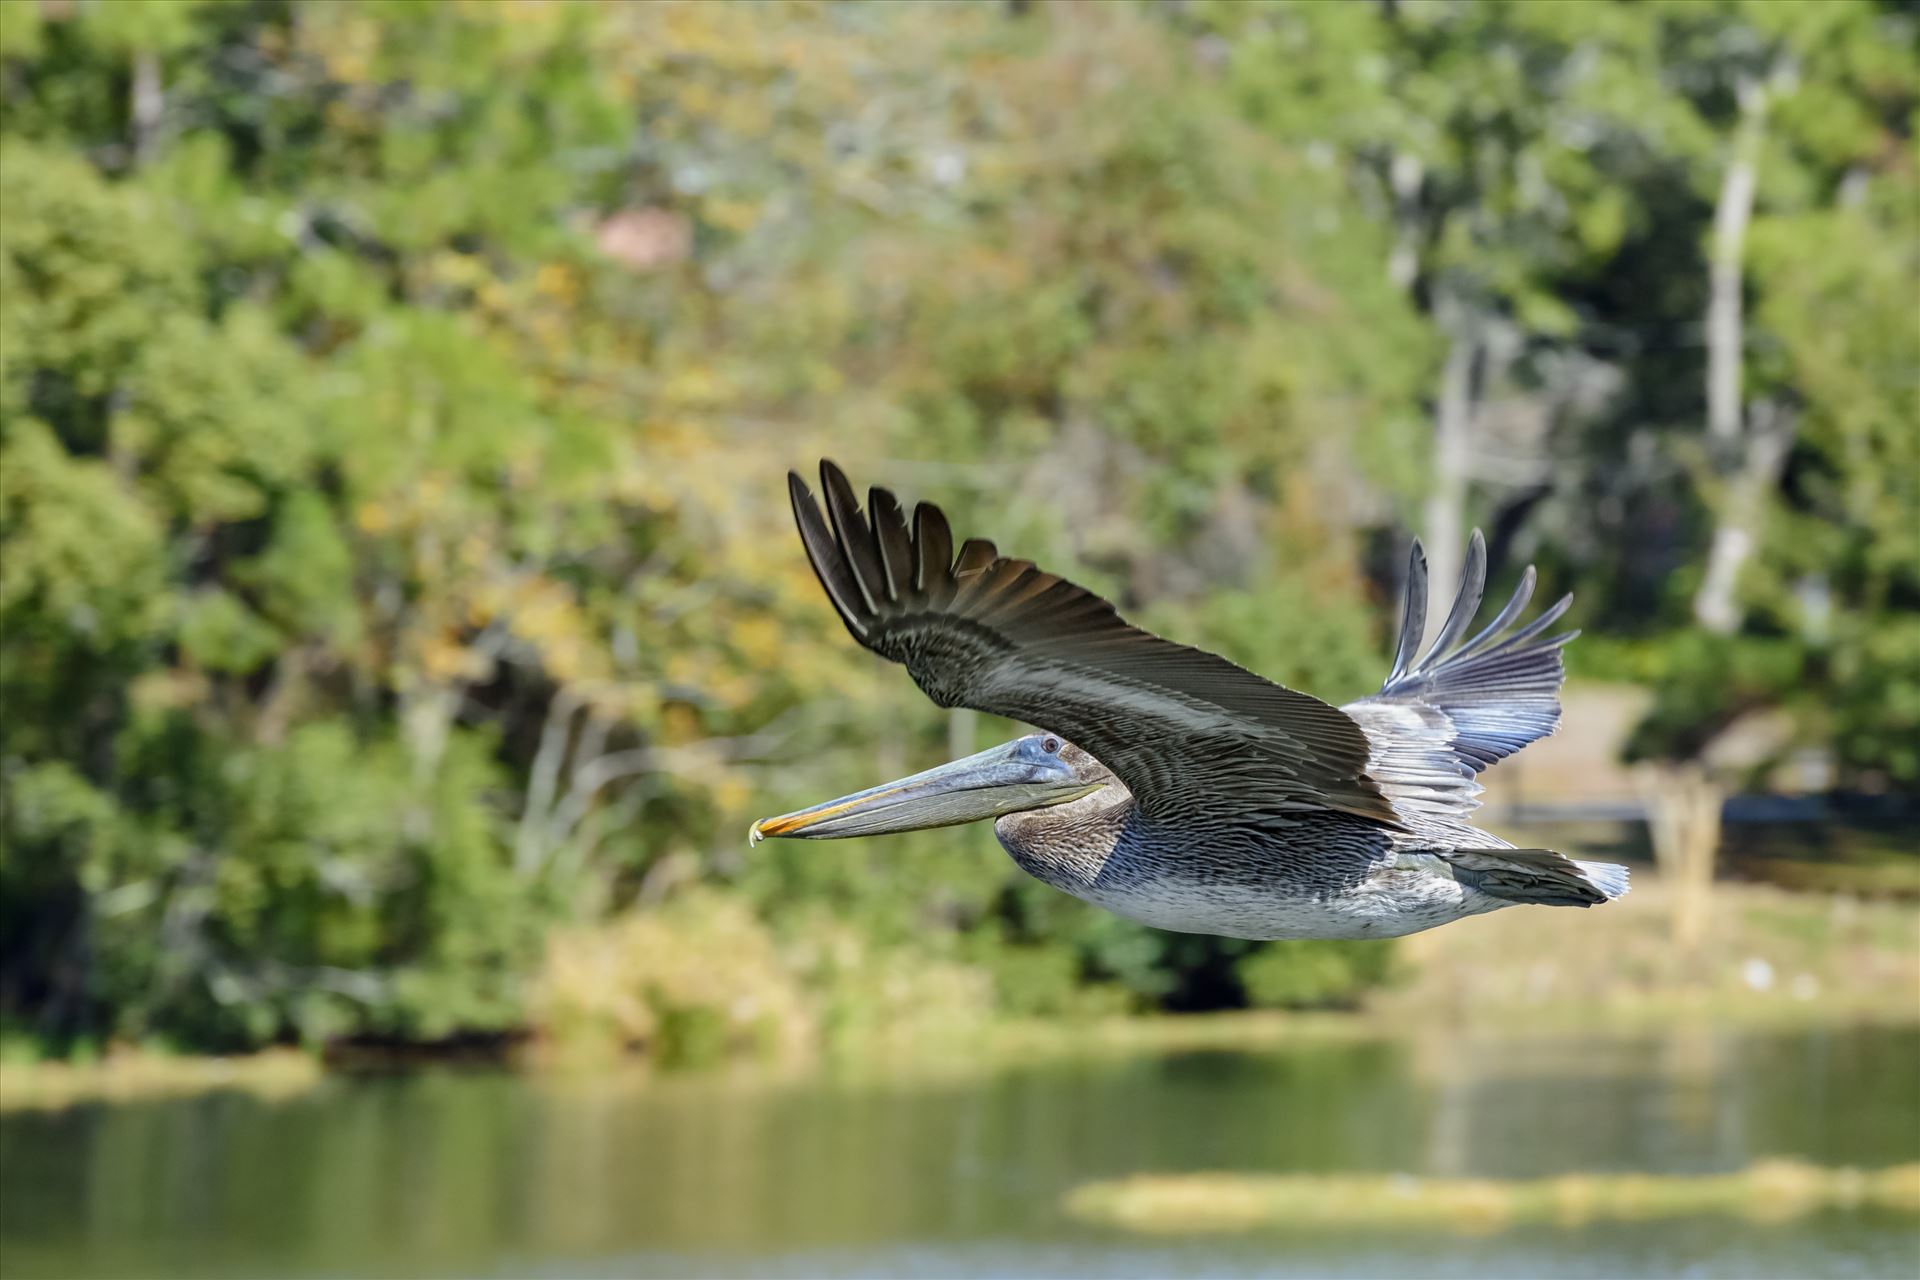 brown pelican in flight over lake caroline ss 8106768.jpg -  by Terry Kelly Photography